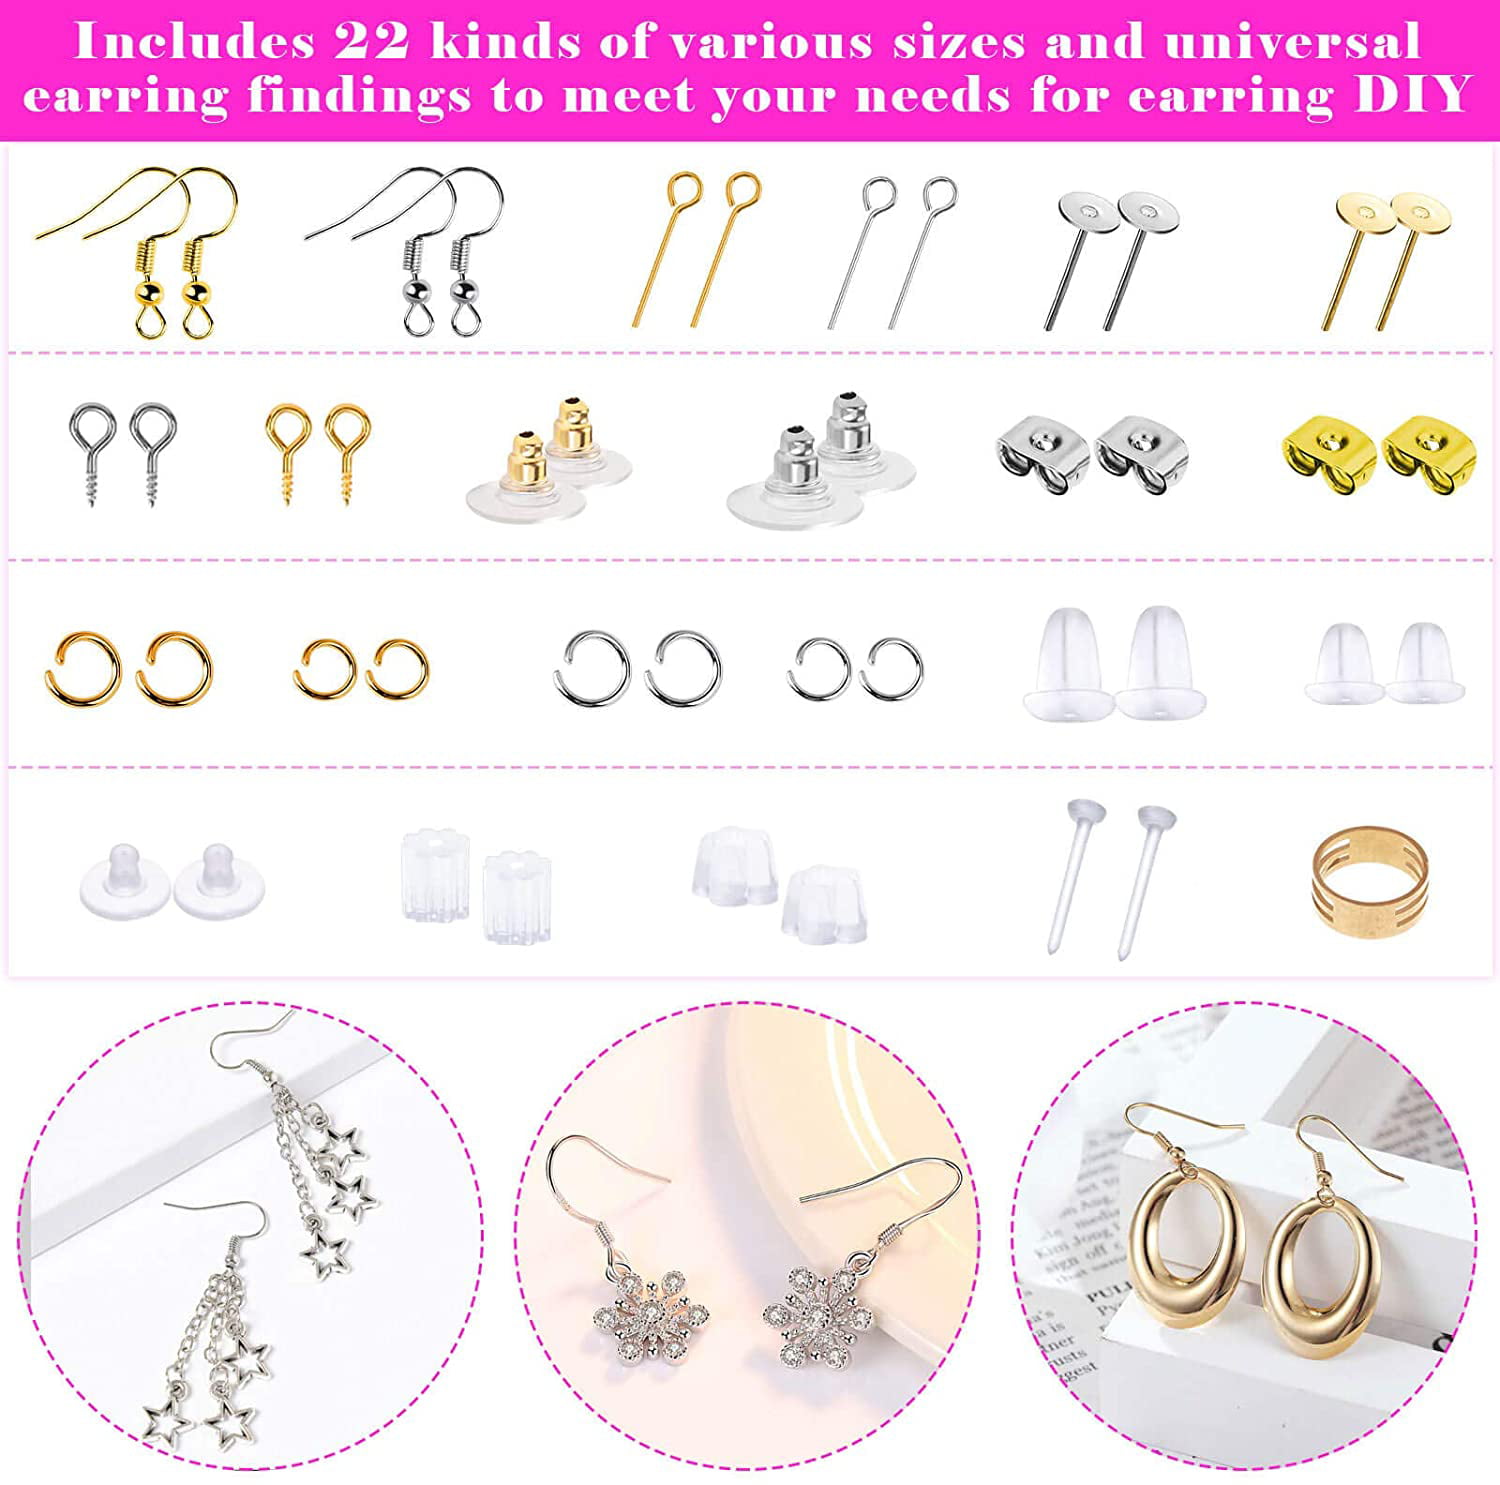 Earring Making Kit, 2290Pcs Earring Making Supplies Kit with Earring Hooks,  Earring Findings, Earring Backs, Earring Posts, Jump Rings for Jewelry